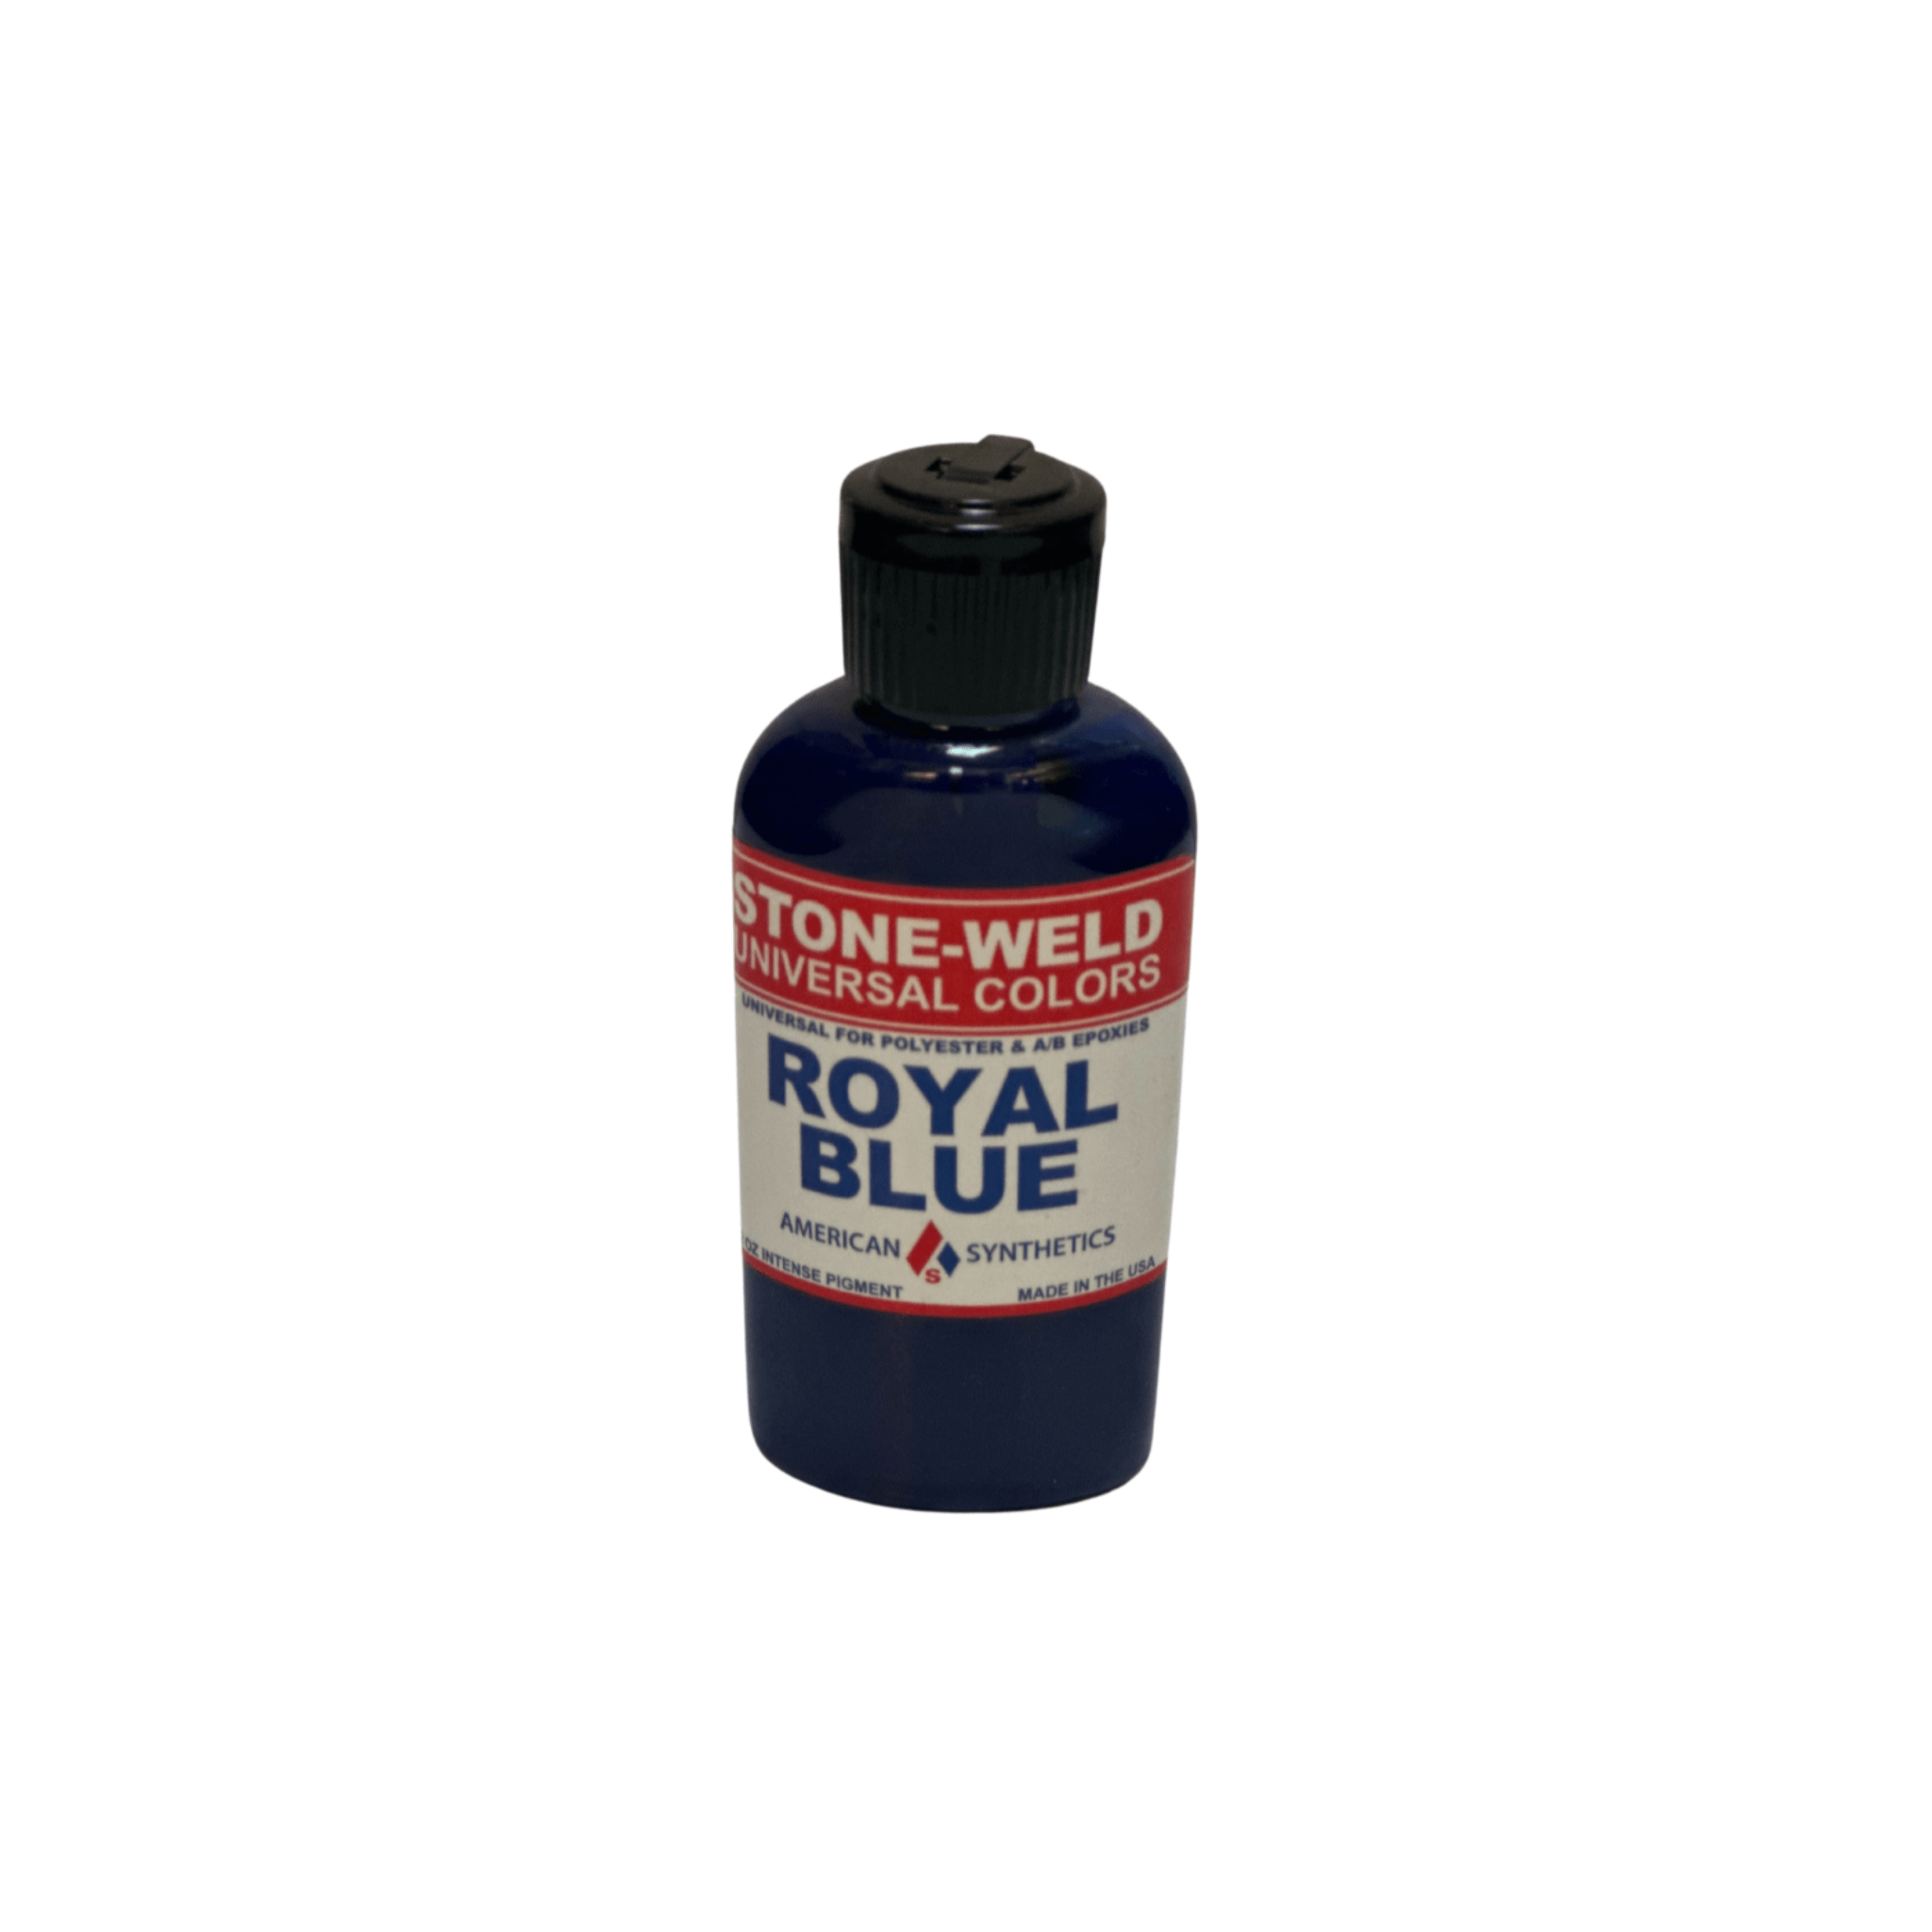 Stone-Weld 2 oz. Universal Color, Royal Blue - Direct Stone Tool Supply, Inc